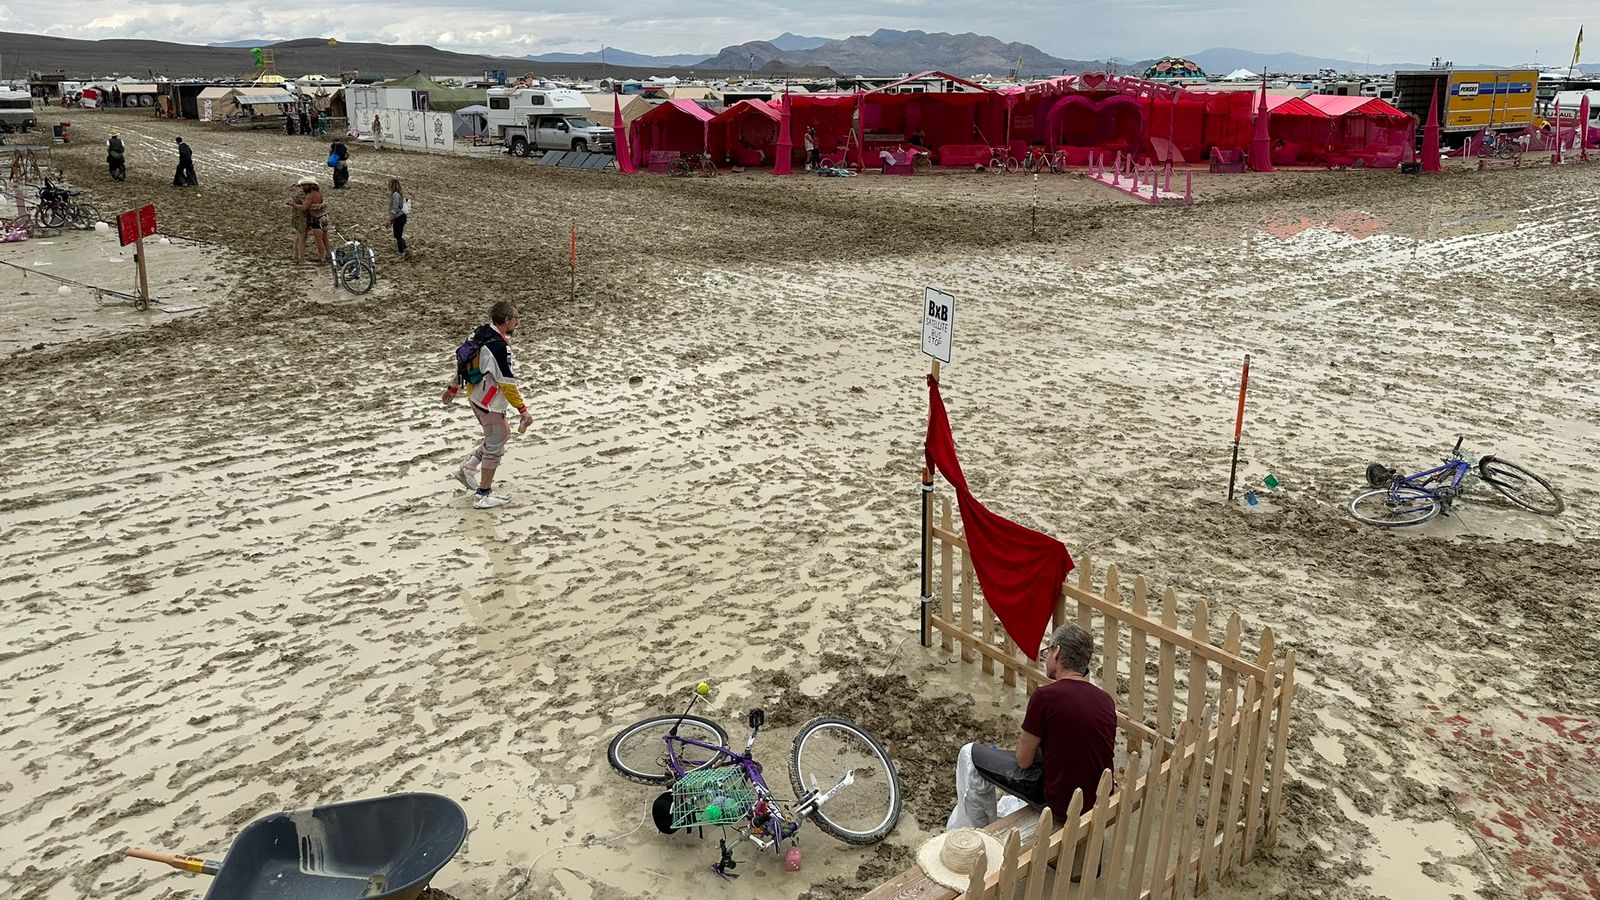 Burning Man festival-goers urged to seek shelter and conserve food as rain turns site into mud bath